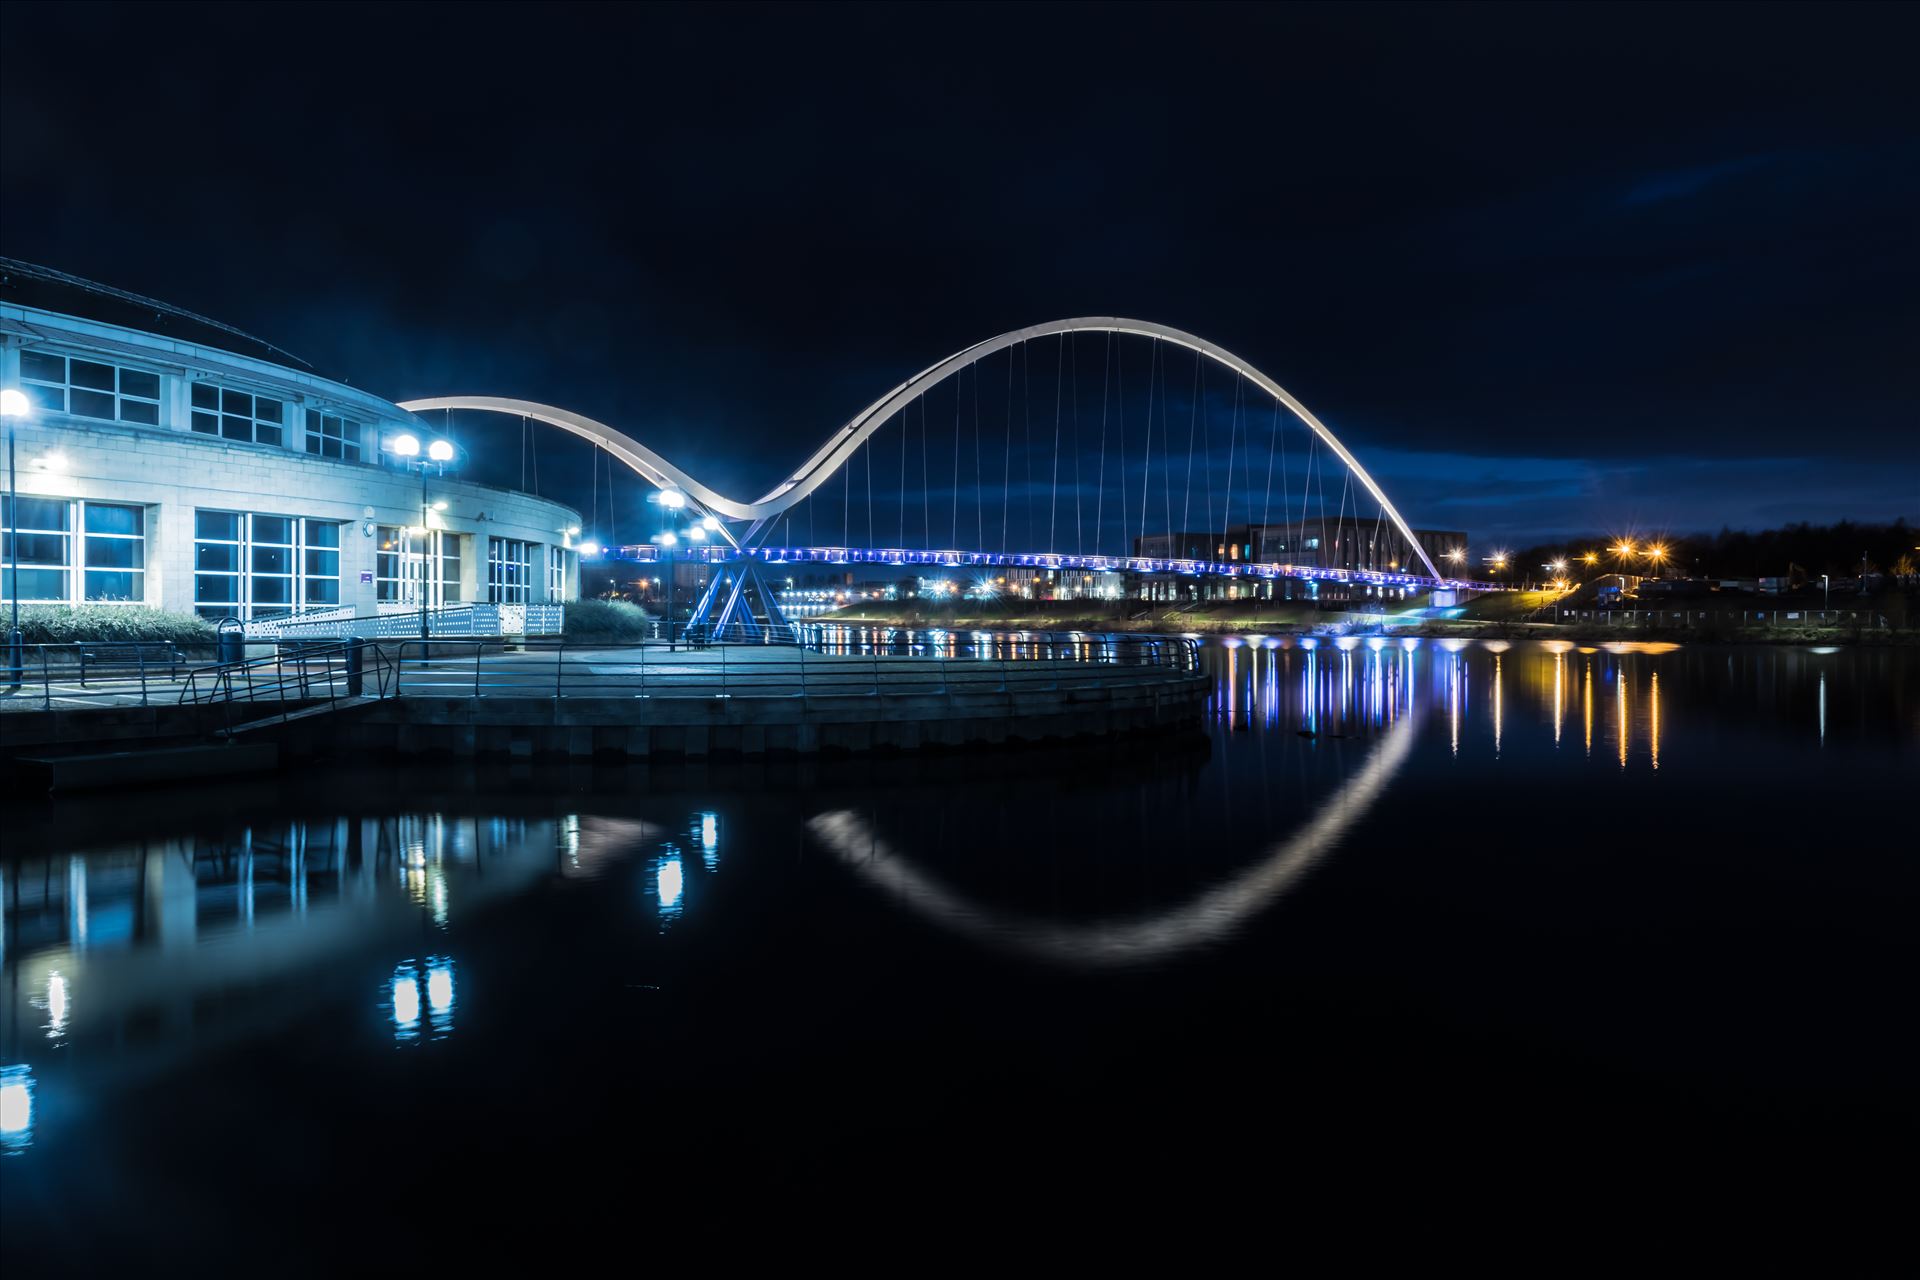 The Infinity Bridge 07 - The Infinity Bridge is a public pedestrian and cycle footbridge across the River Tees that was officially opened on 14 May 2009 at a cost of £15 million. by philreay